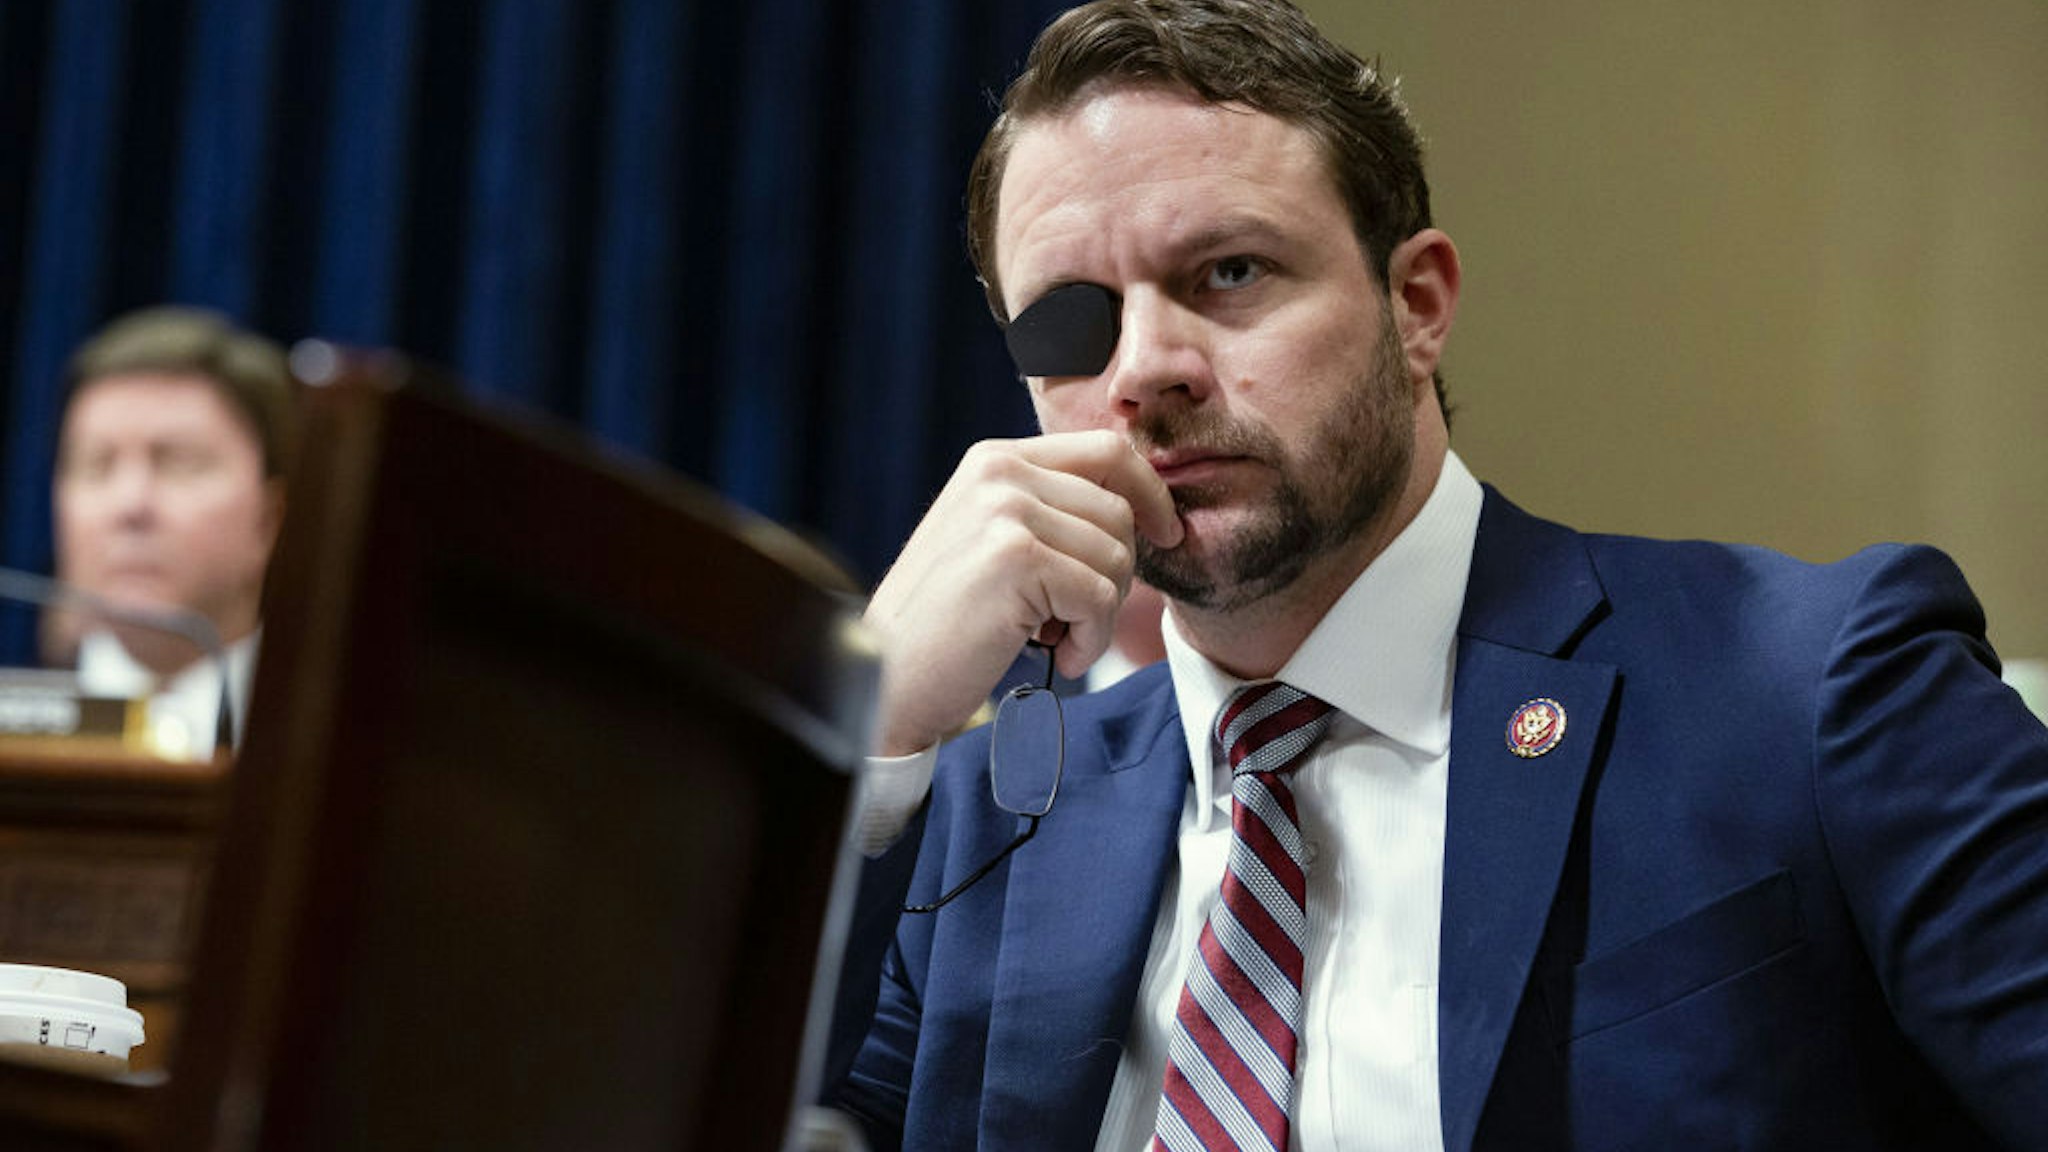 Representative Dan Crenshaw, a Republican from Texas, listens during a House Homeland Security Committee hearing in Washington, D.C., U.S., on Wednesday, June 26, 2019. Google's global